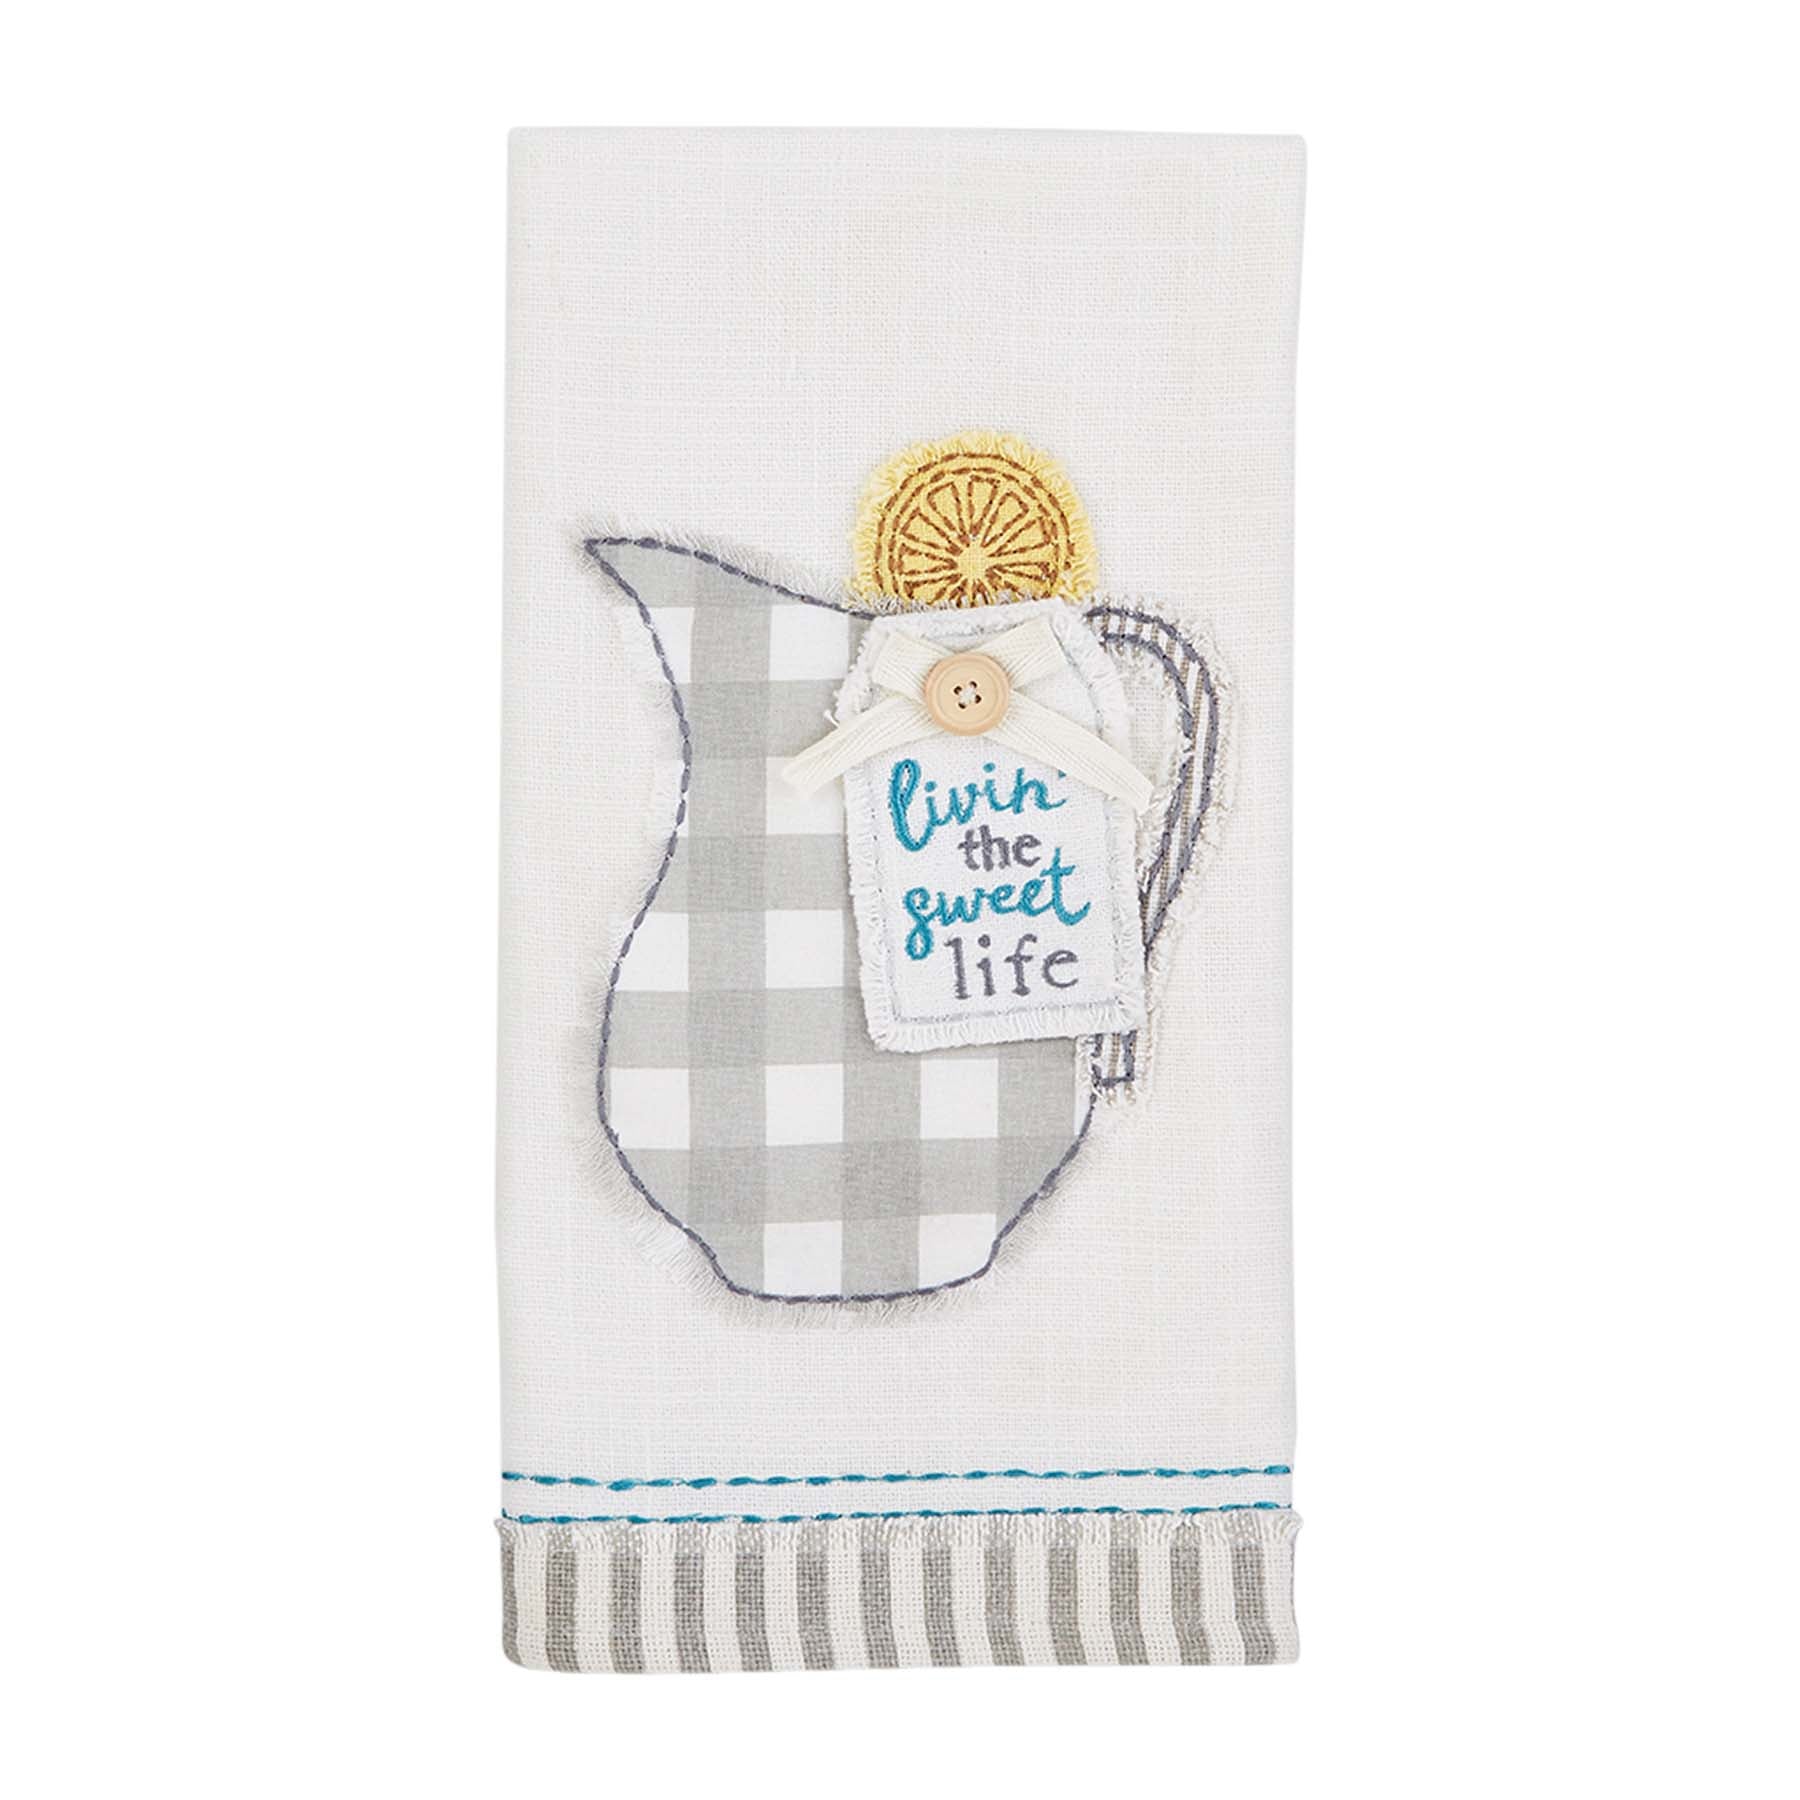 Mud Pie Embroidered Sequin Summer Beach Dish Towel Collection 26